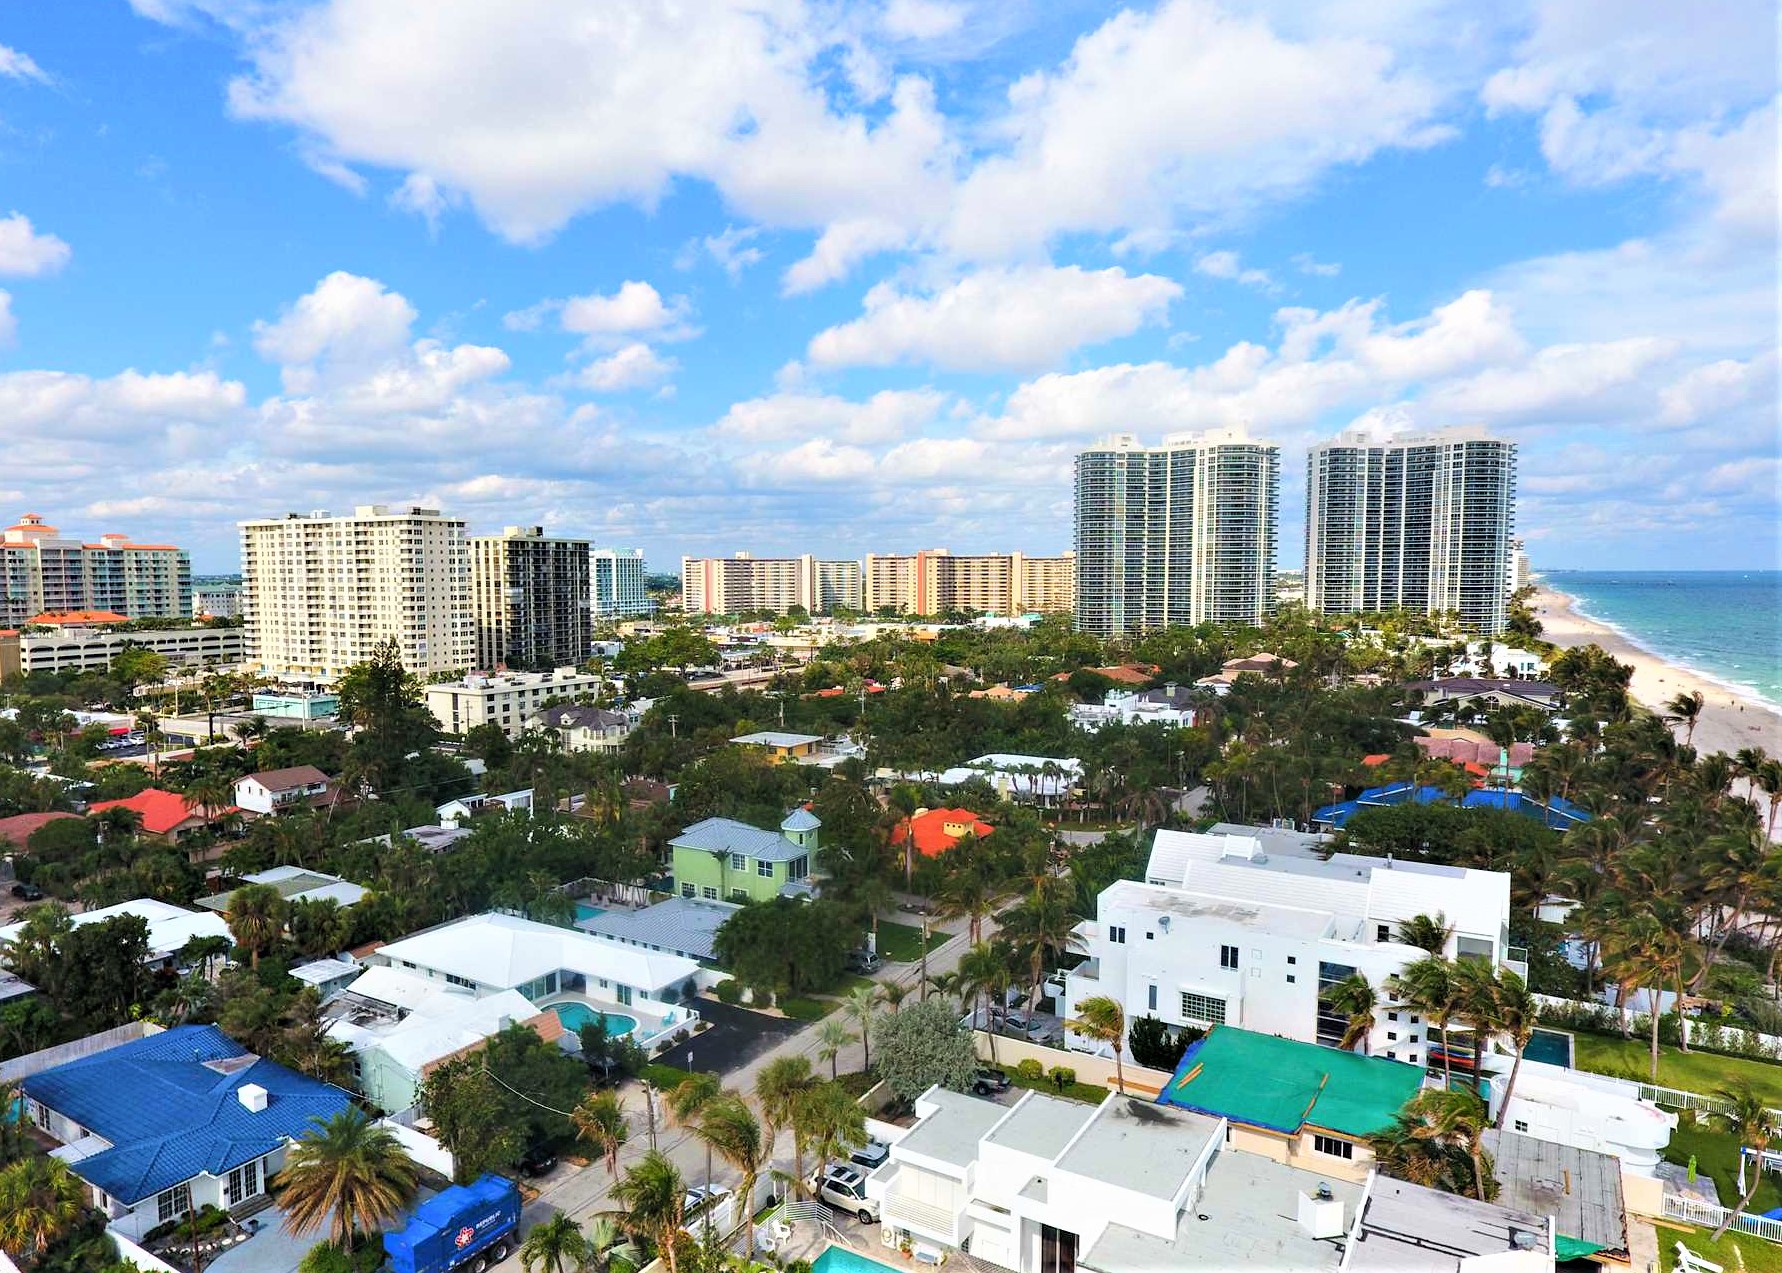 The home is located close to all the action of Fort Lauderda